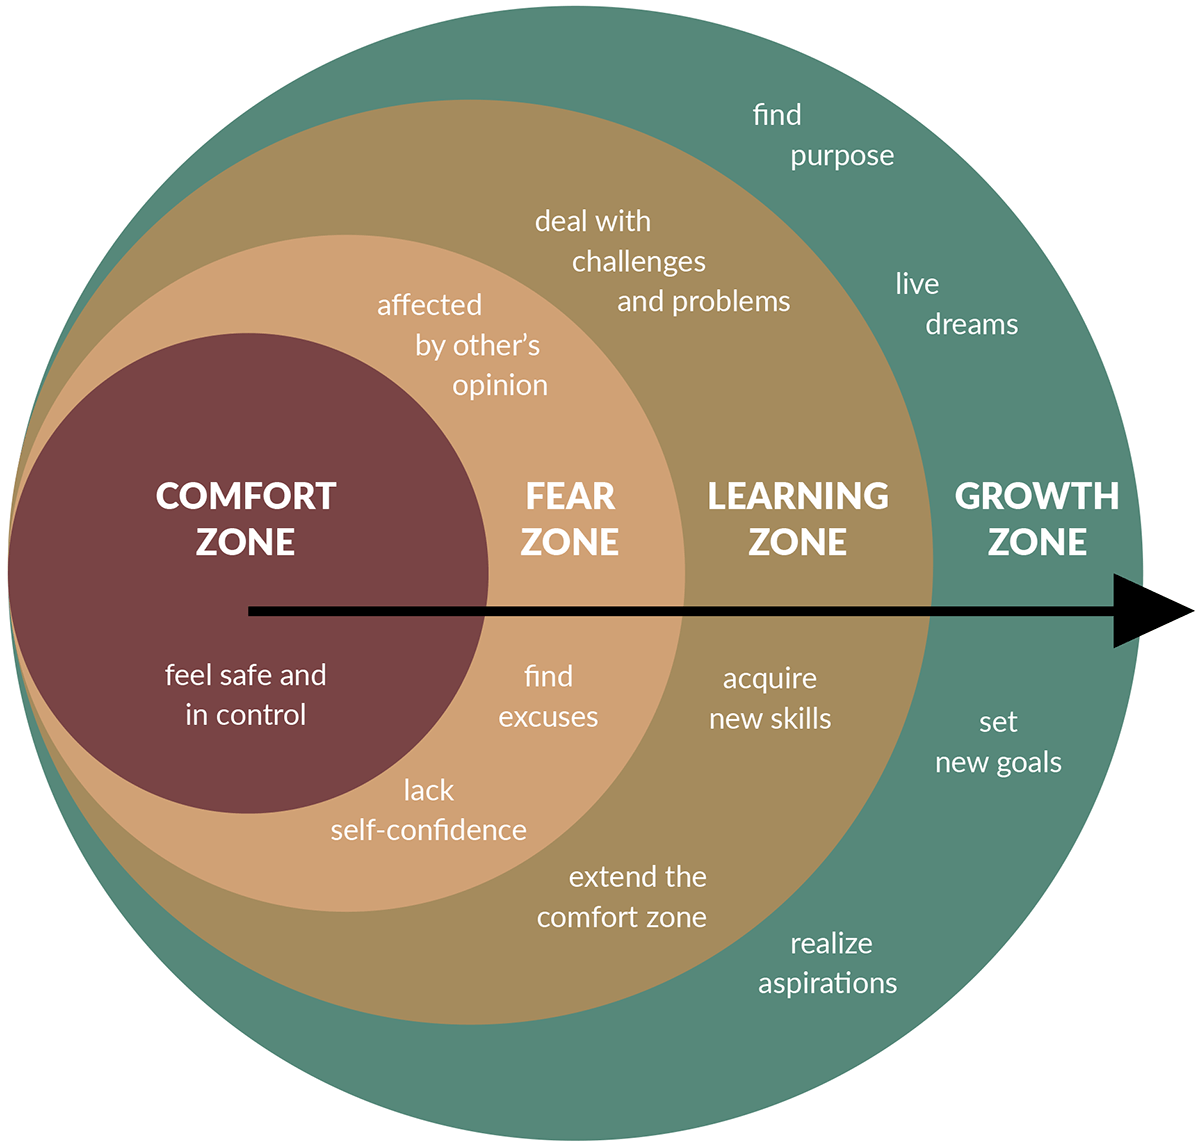 How to Leave your Comfort Zone and Enter your 'Growth Zone'